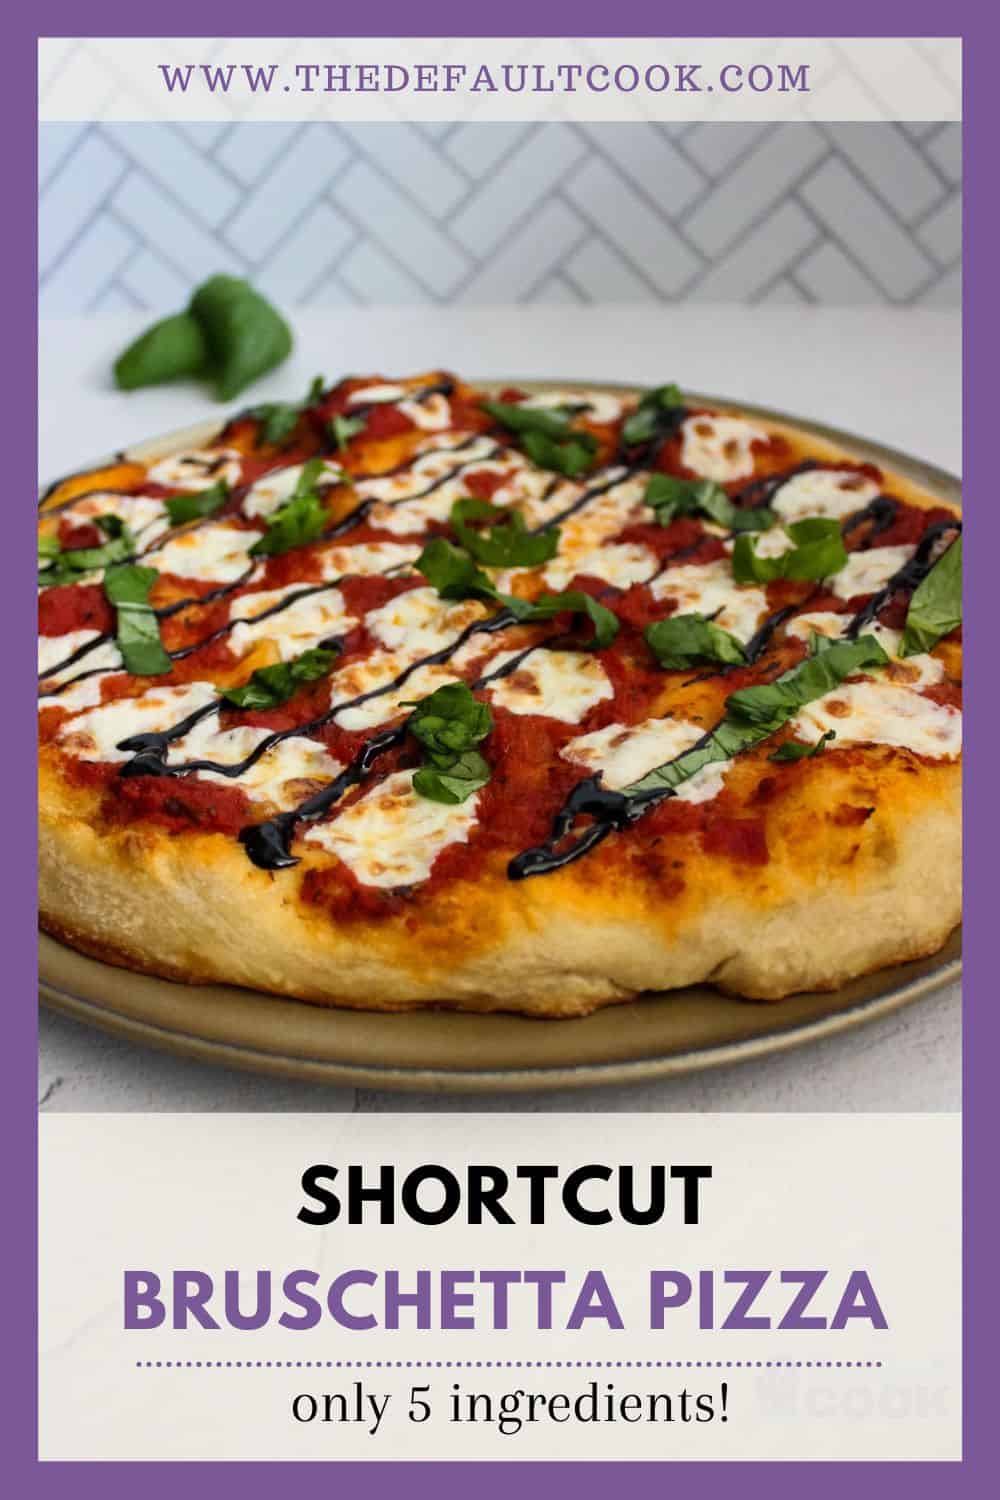 Pizza on the pan with basil behind it, and text below reading "shortcut bruschetta pizza".